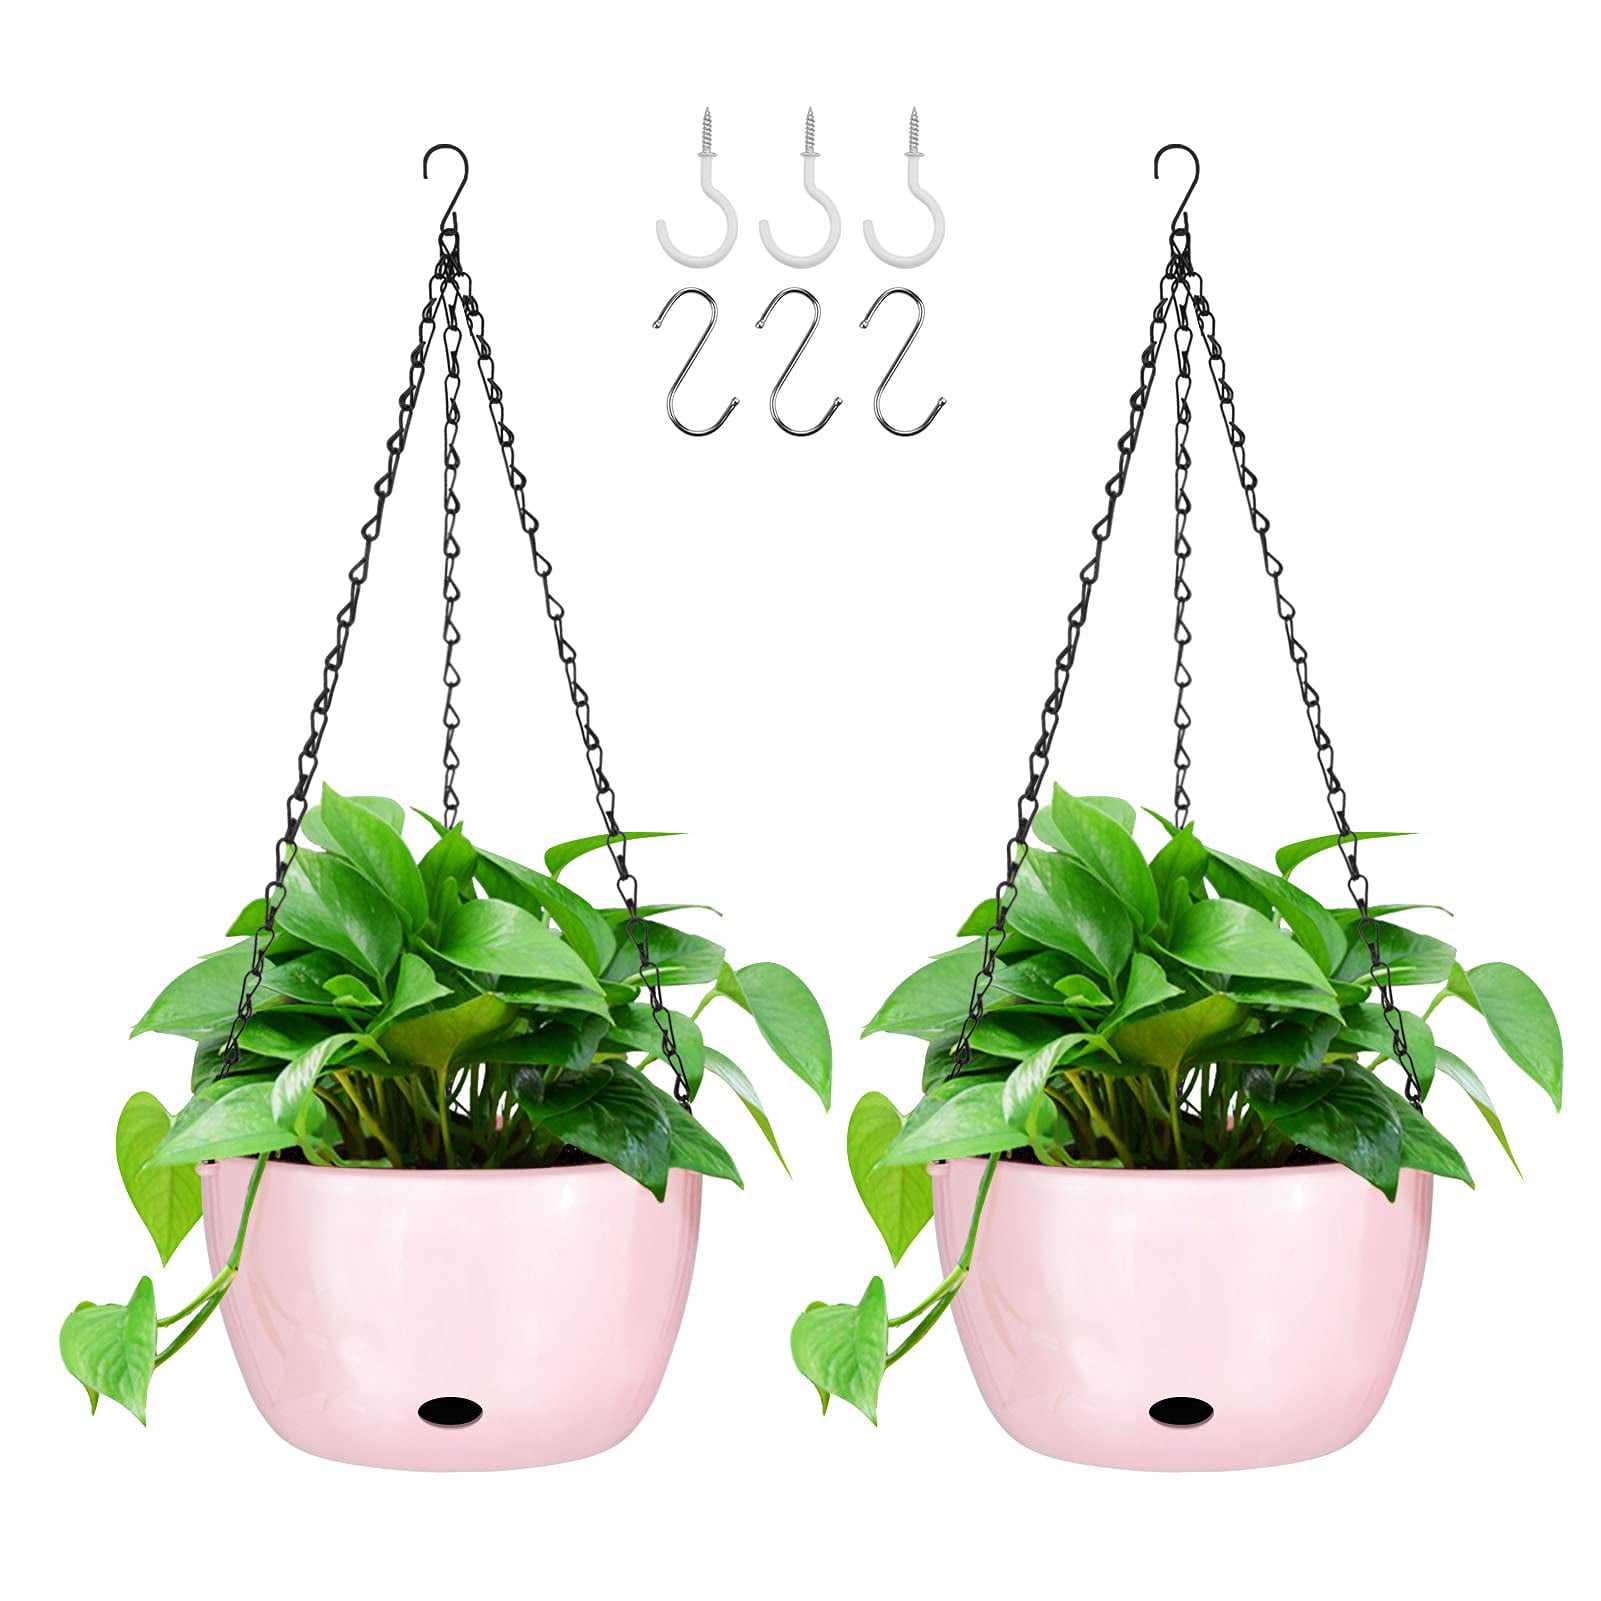 1pc Wall Hanging Basket Practical Durable Plant Flowerpot for Indoor Inside Home 